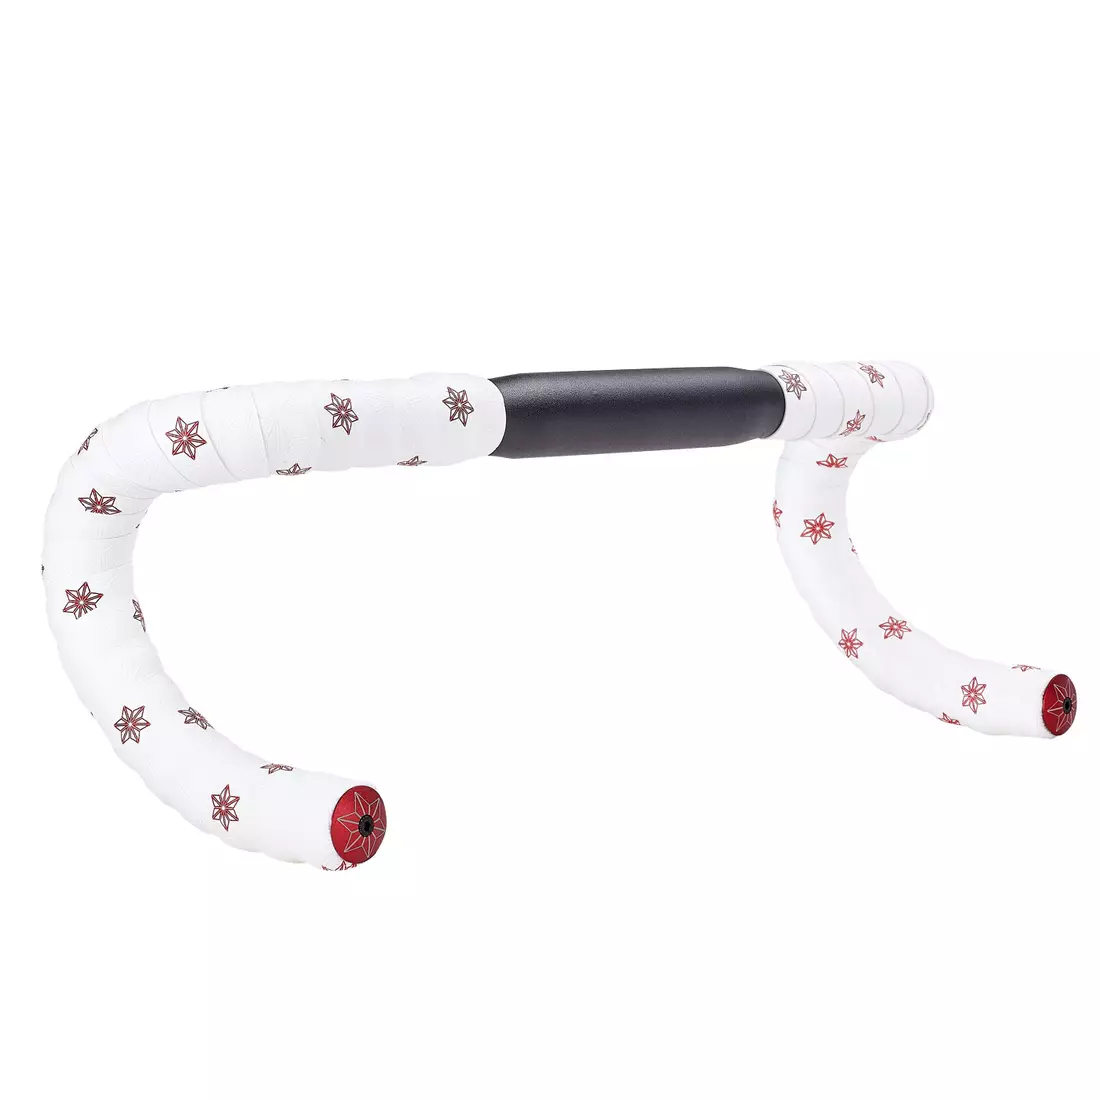 SUPACAZ BT-104 SUPER STICKY GALAXY handlebar tape white and red